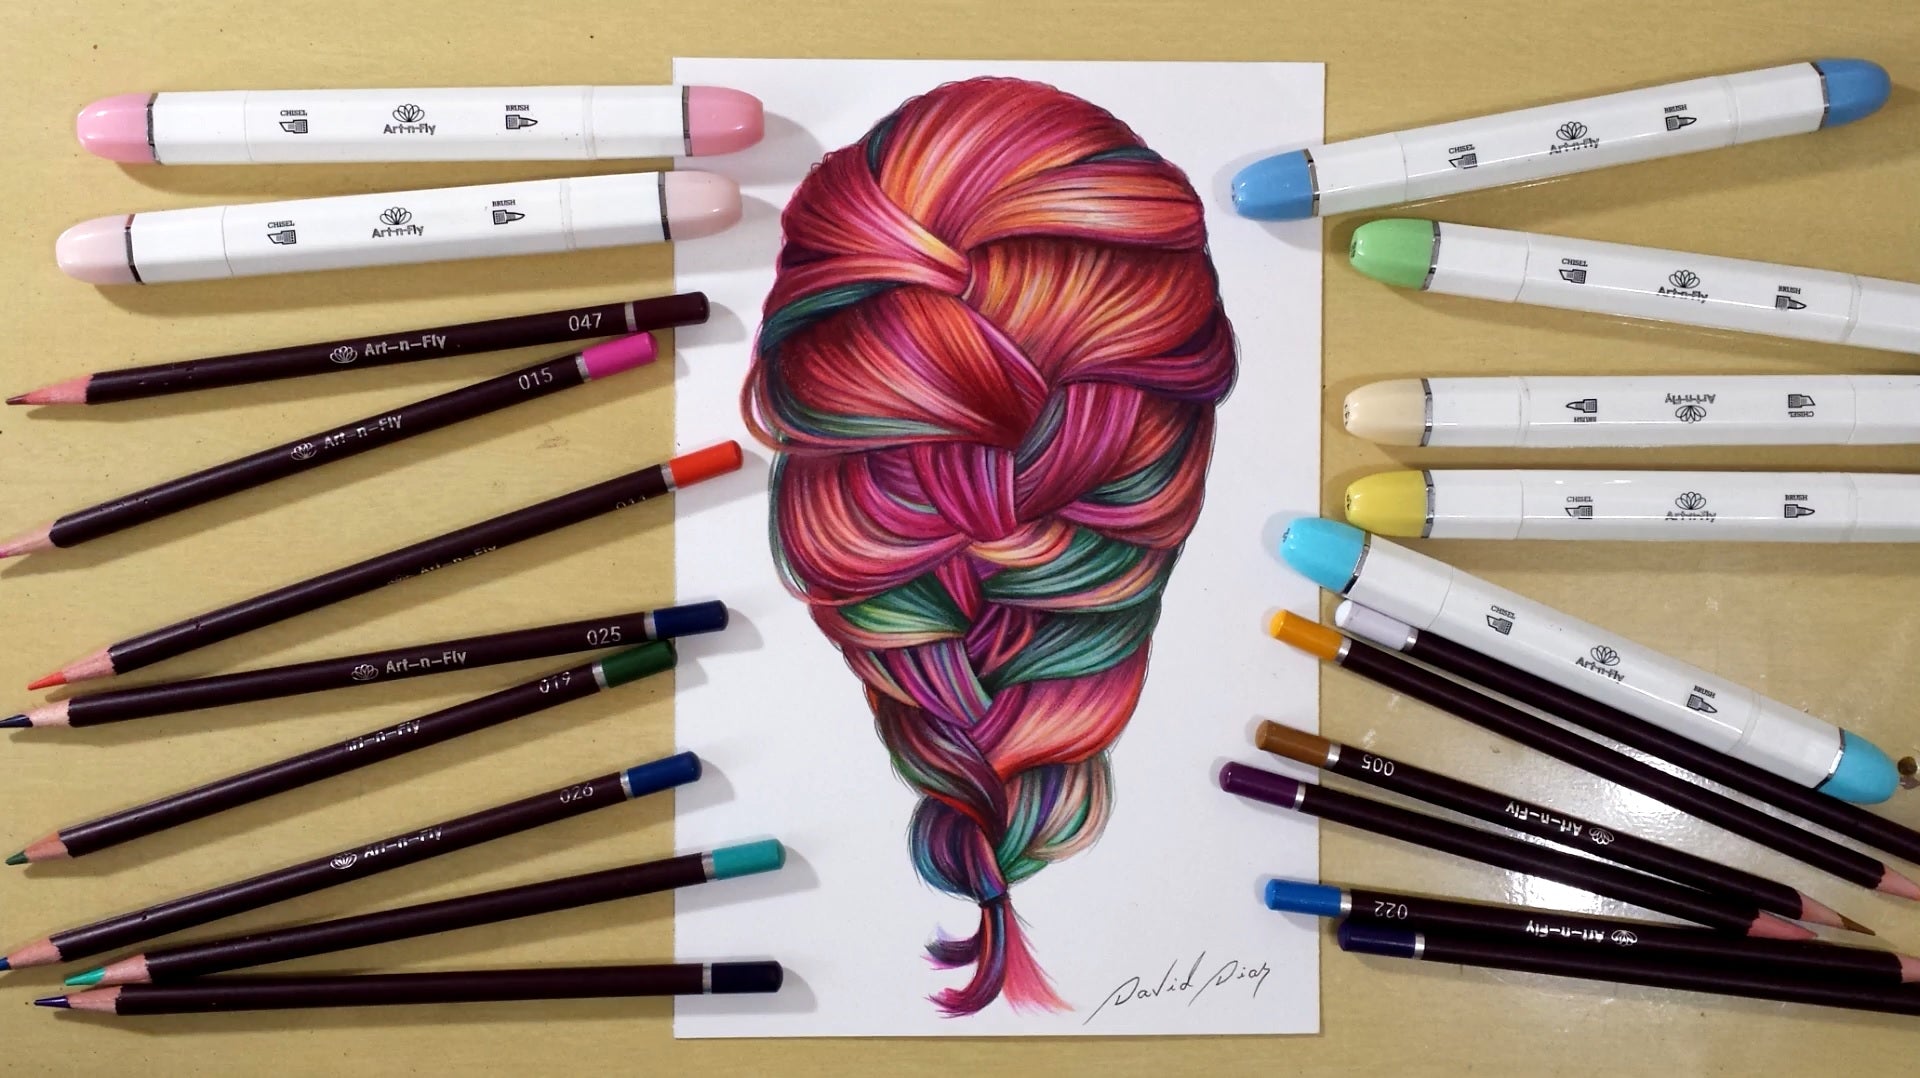 How to Draw Plus Coloring Colorful Hair w/ Marker Tutorial ArtnFly